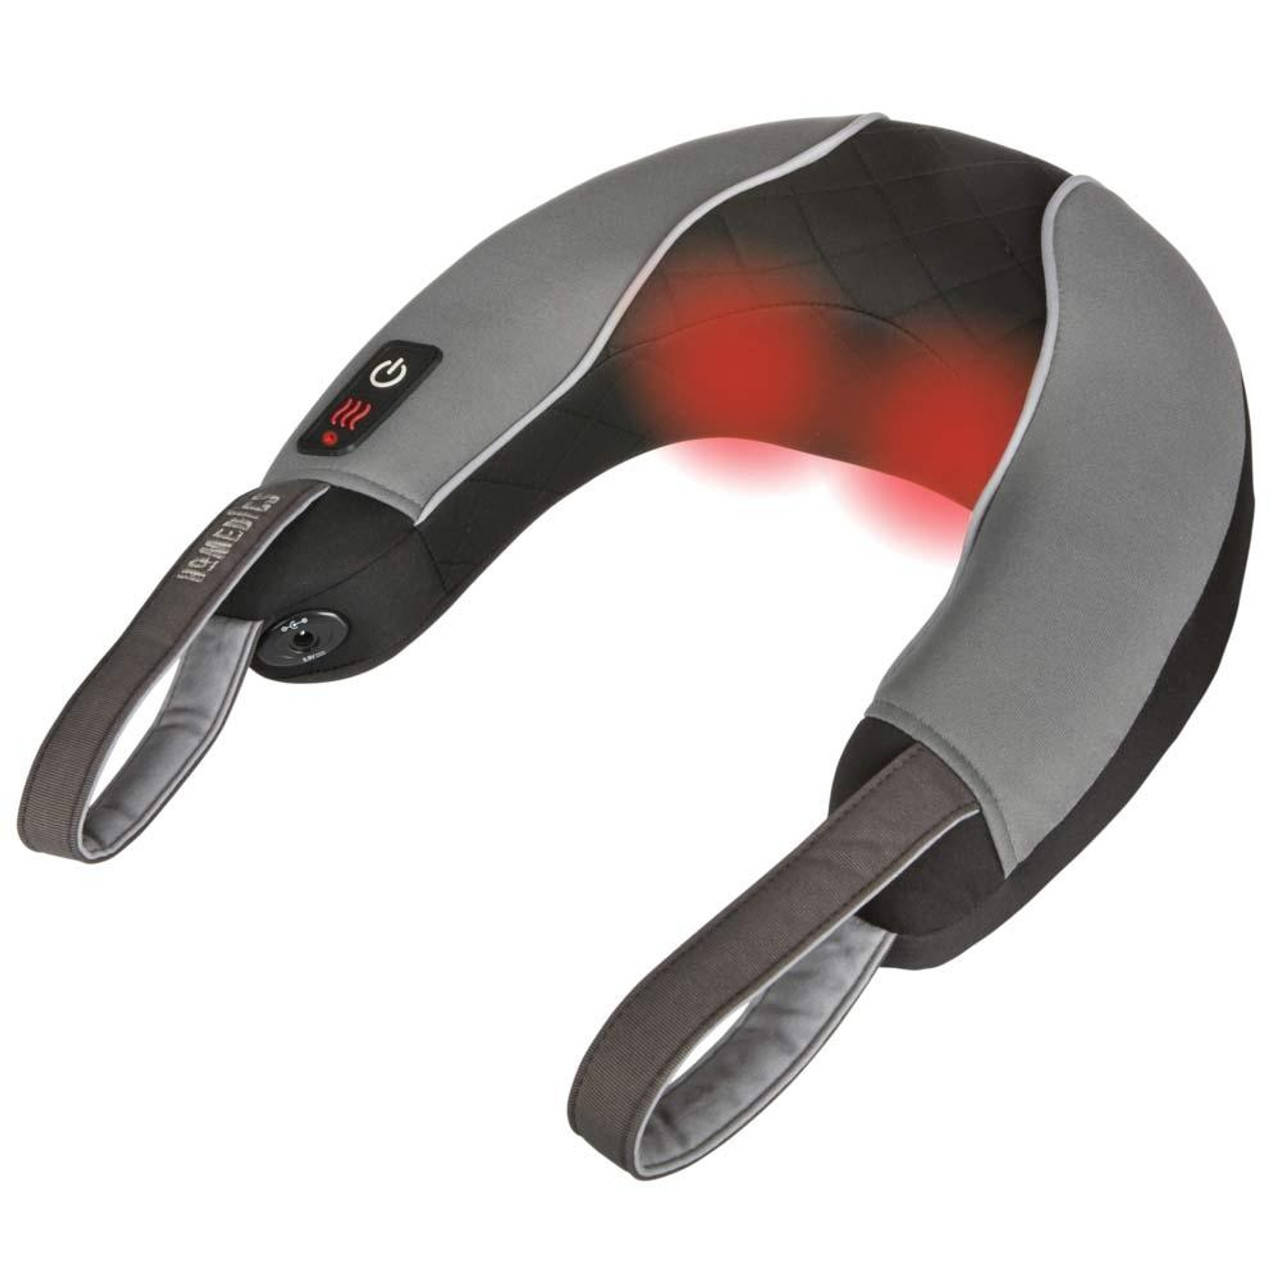 Pro Fit Heat Therapy Massager